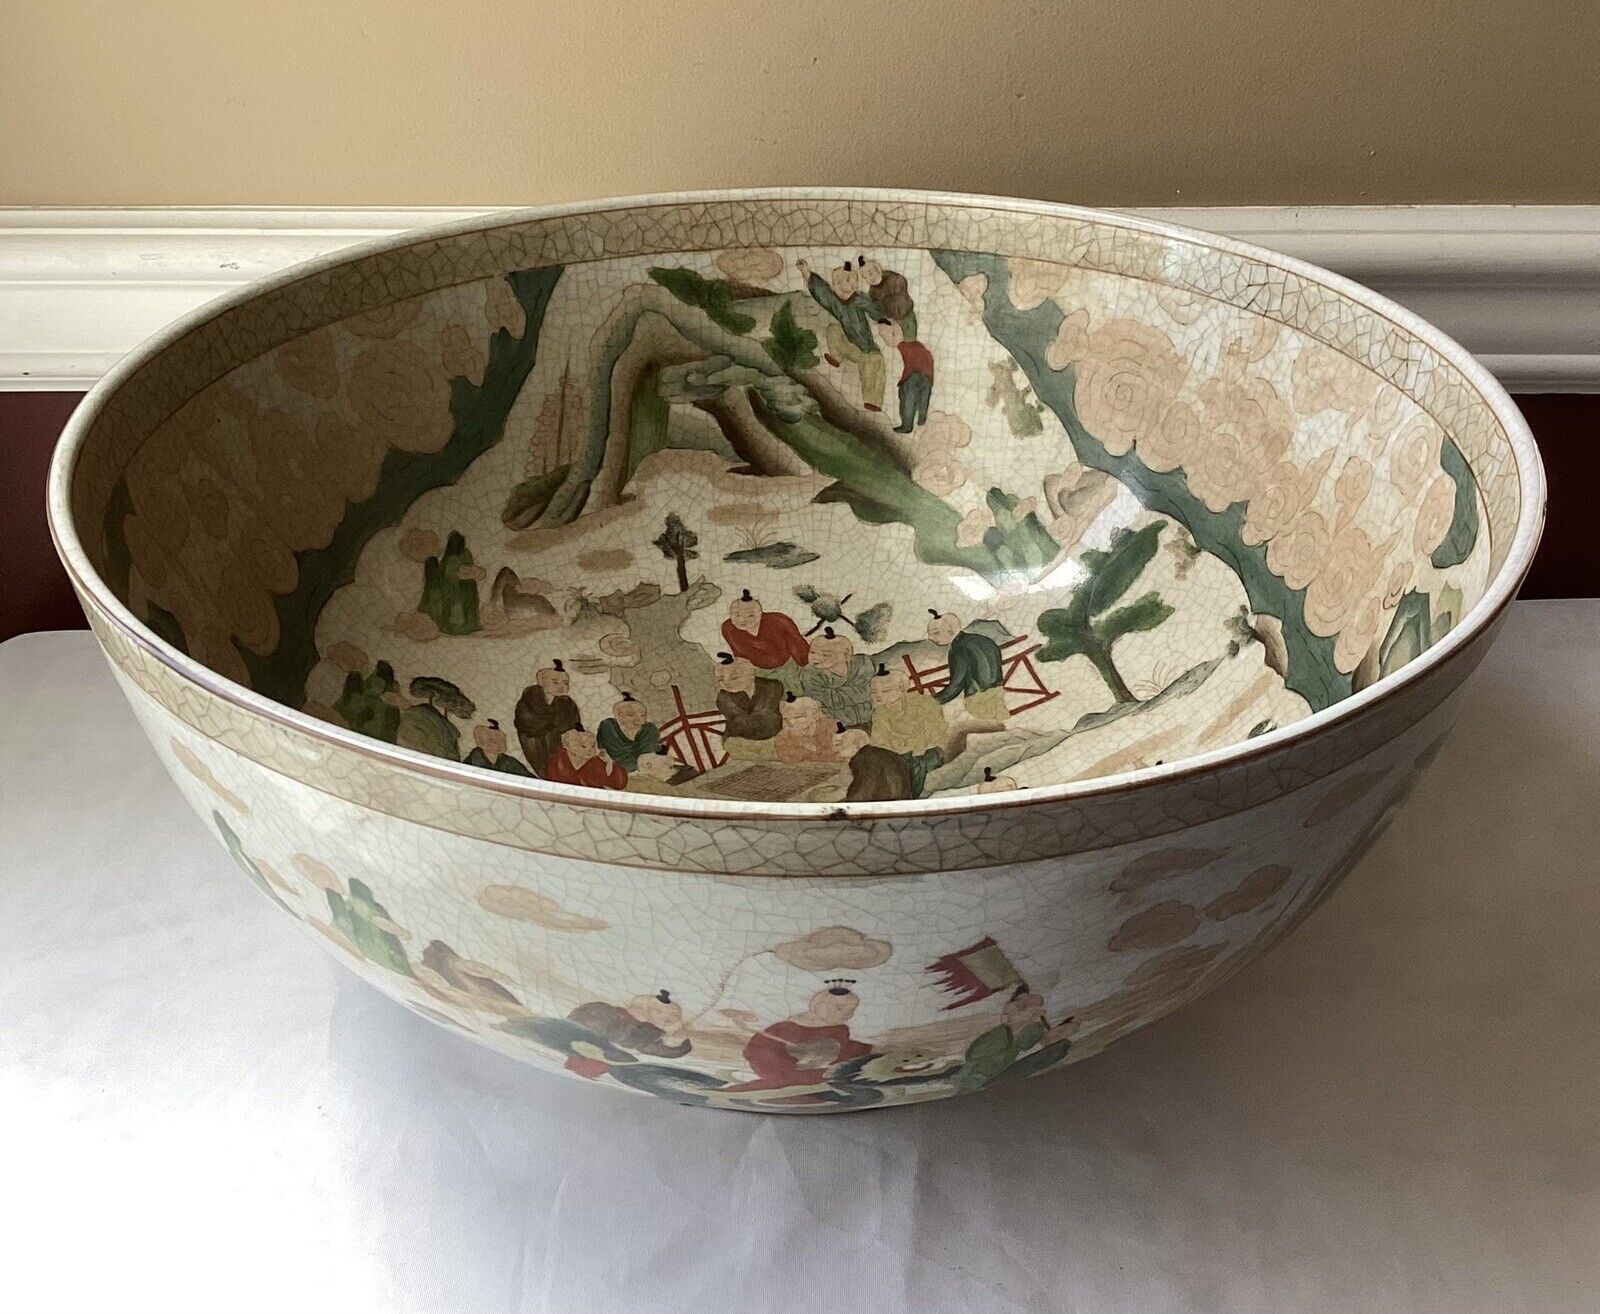 Large VTG Chinese Porcelain Punch Bowl, Speer Collectibles, 16” W, 12 lbs.+